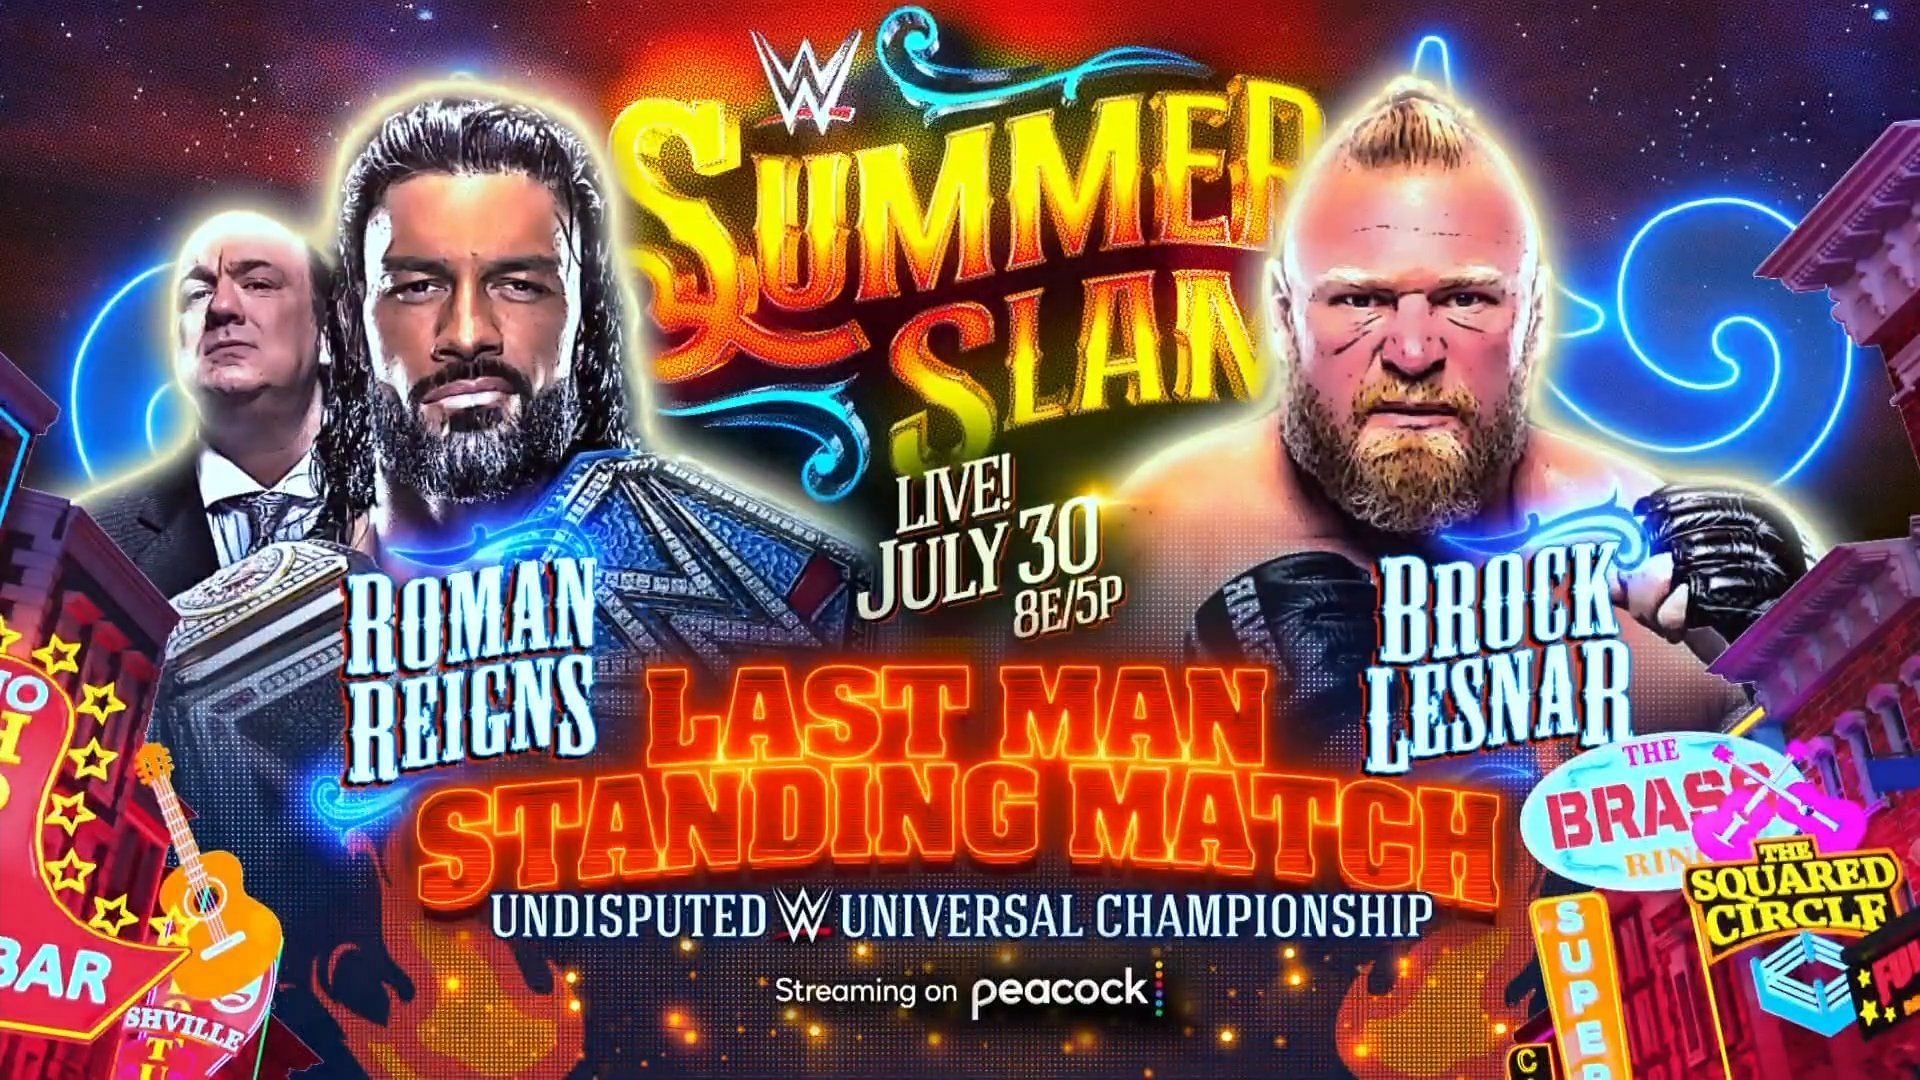 Summerslam 2022 is set to take place in Nashville on July 30.